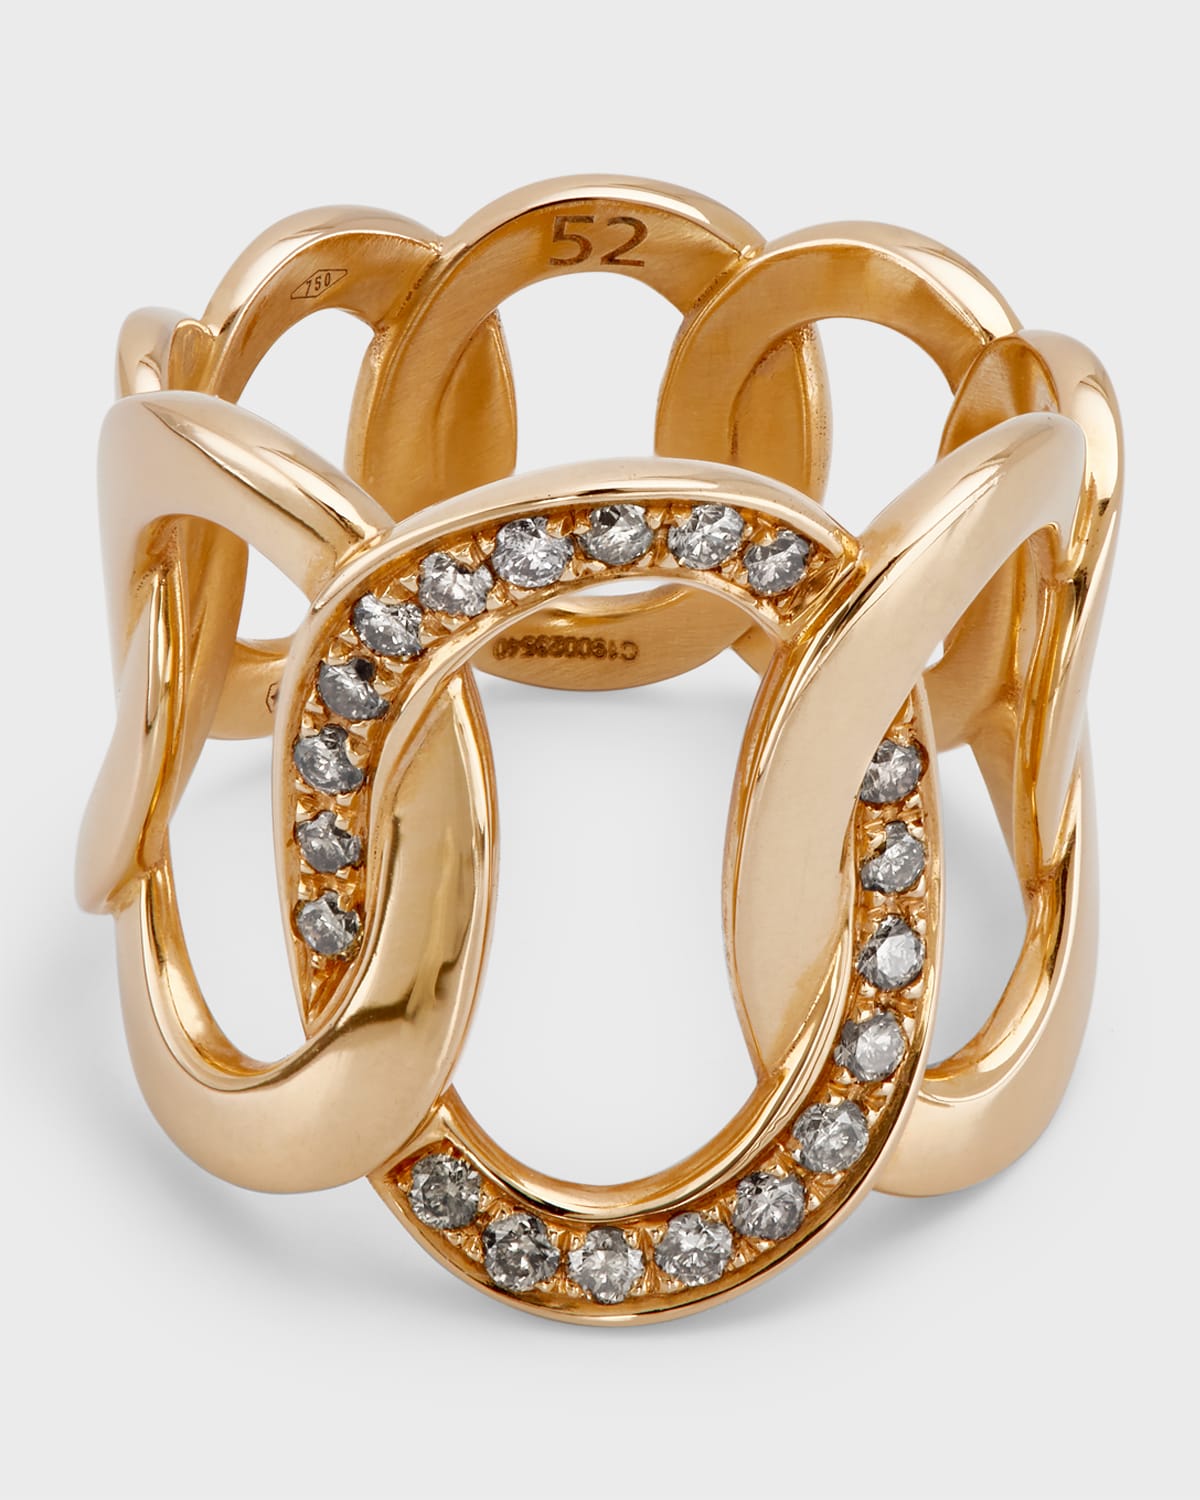 Brera 18K Rose Gold Ring with Diamonds - Size 52